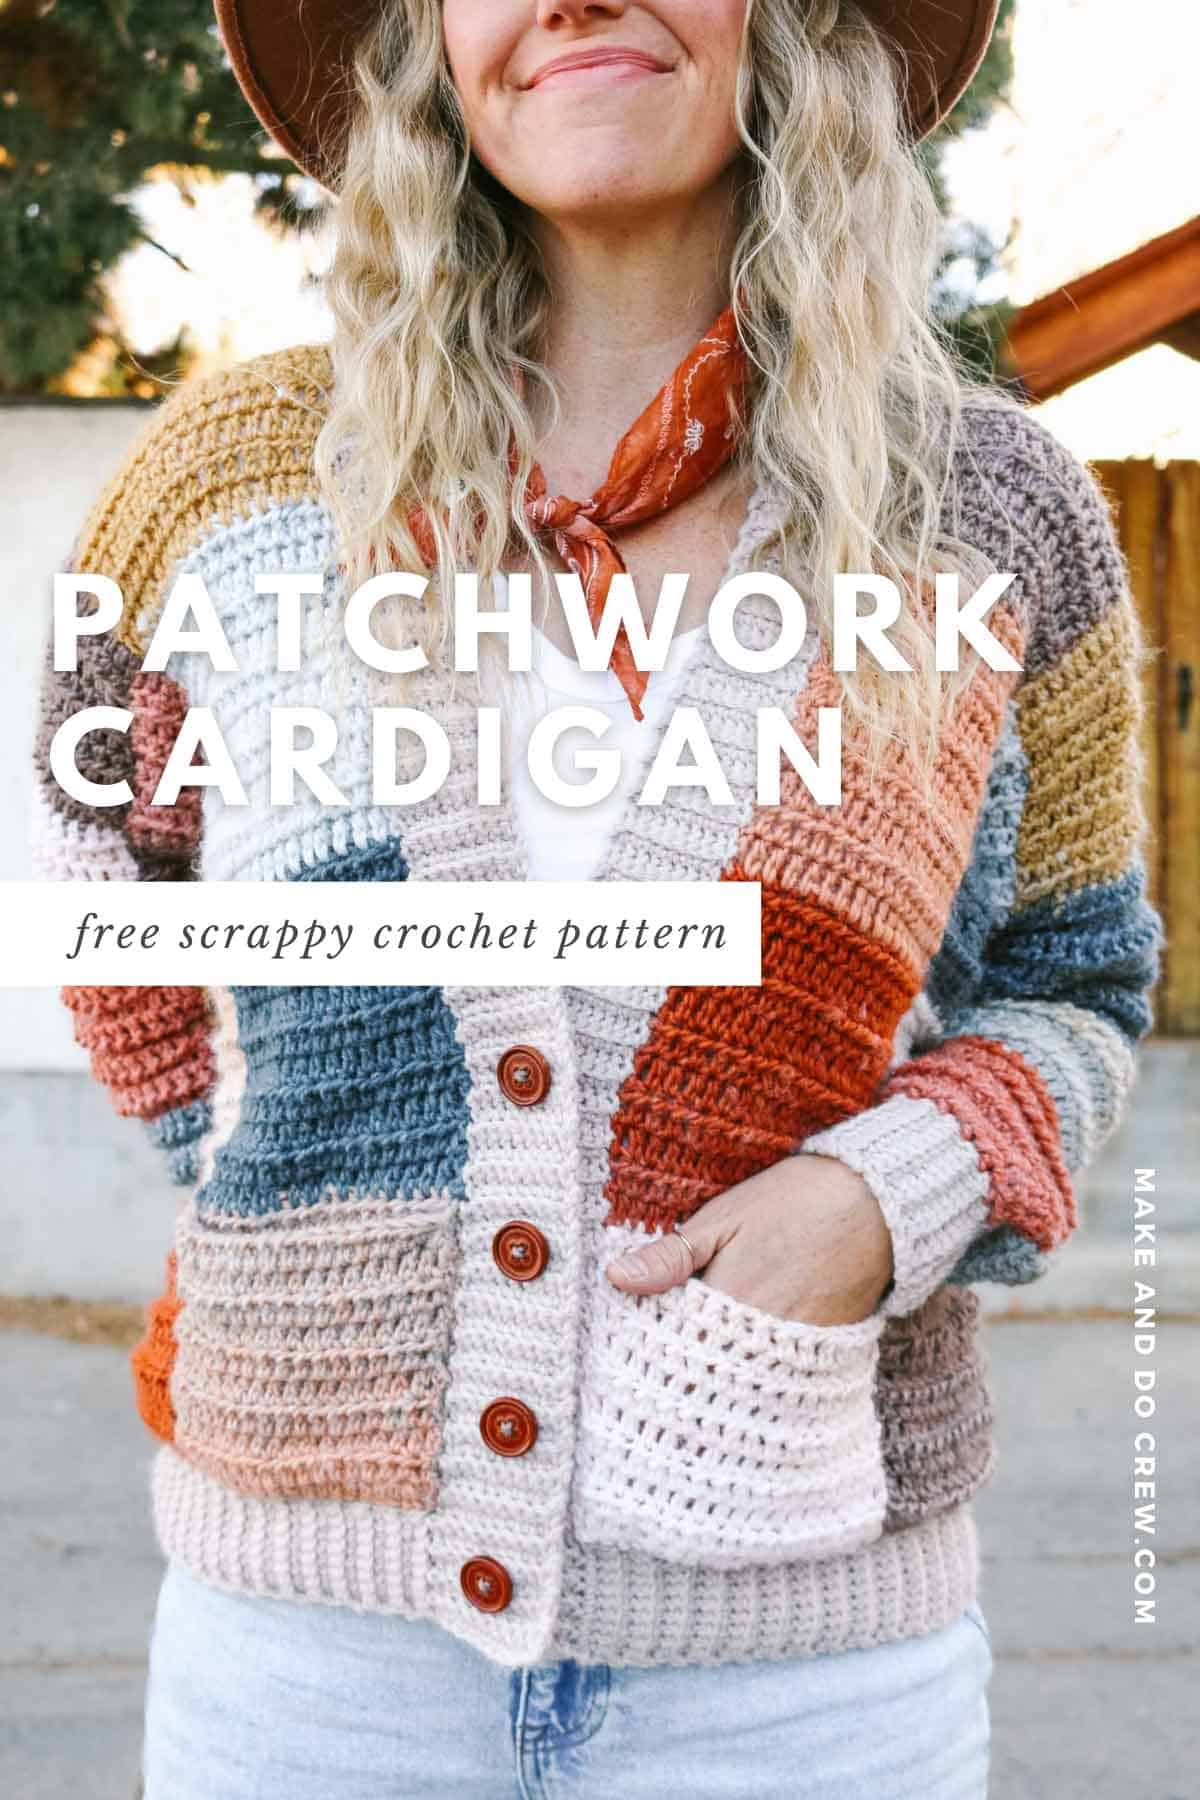 Blonde woman wearing a colorful crochet patchwork sweater with buttons. Her left hand is in the cardigan pocket.